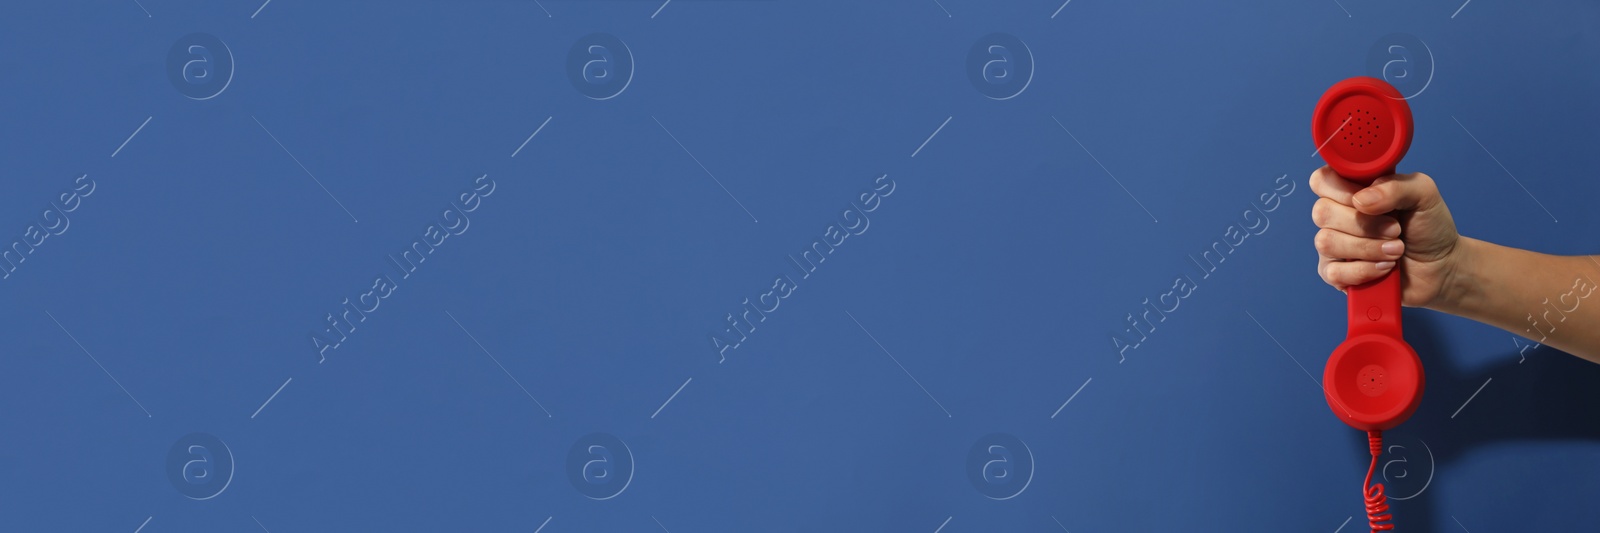 Image of Hotline service. Woman with telephone receiver and space for text on blue background, banner design